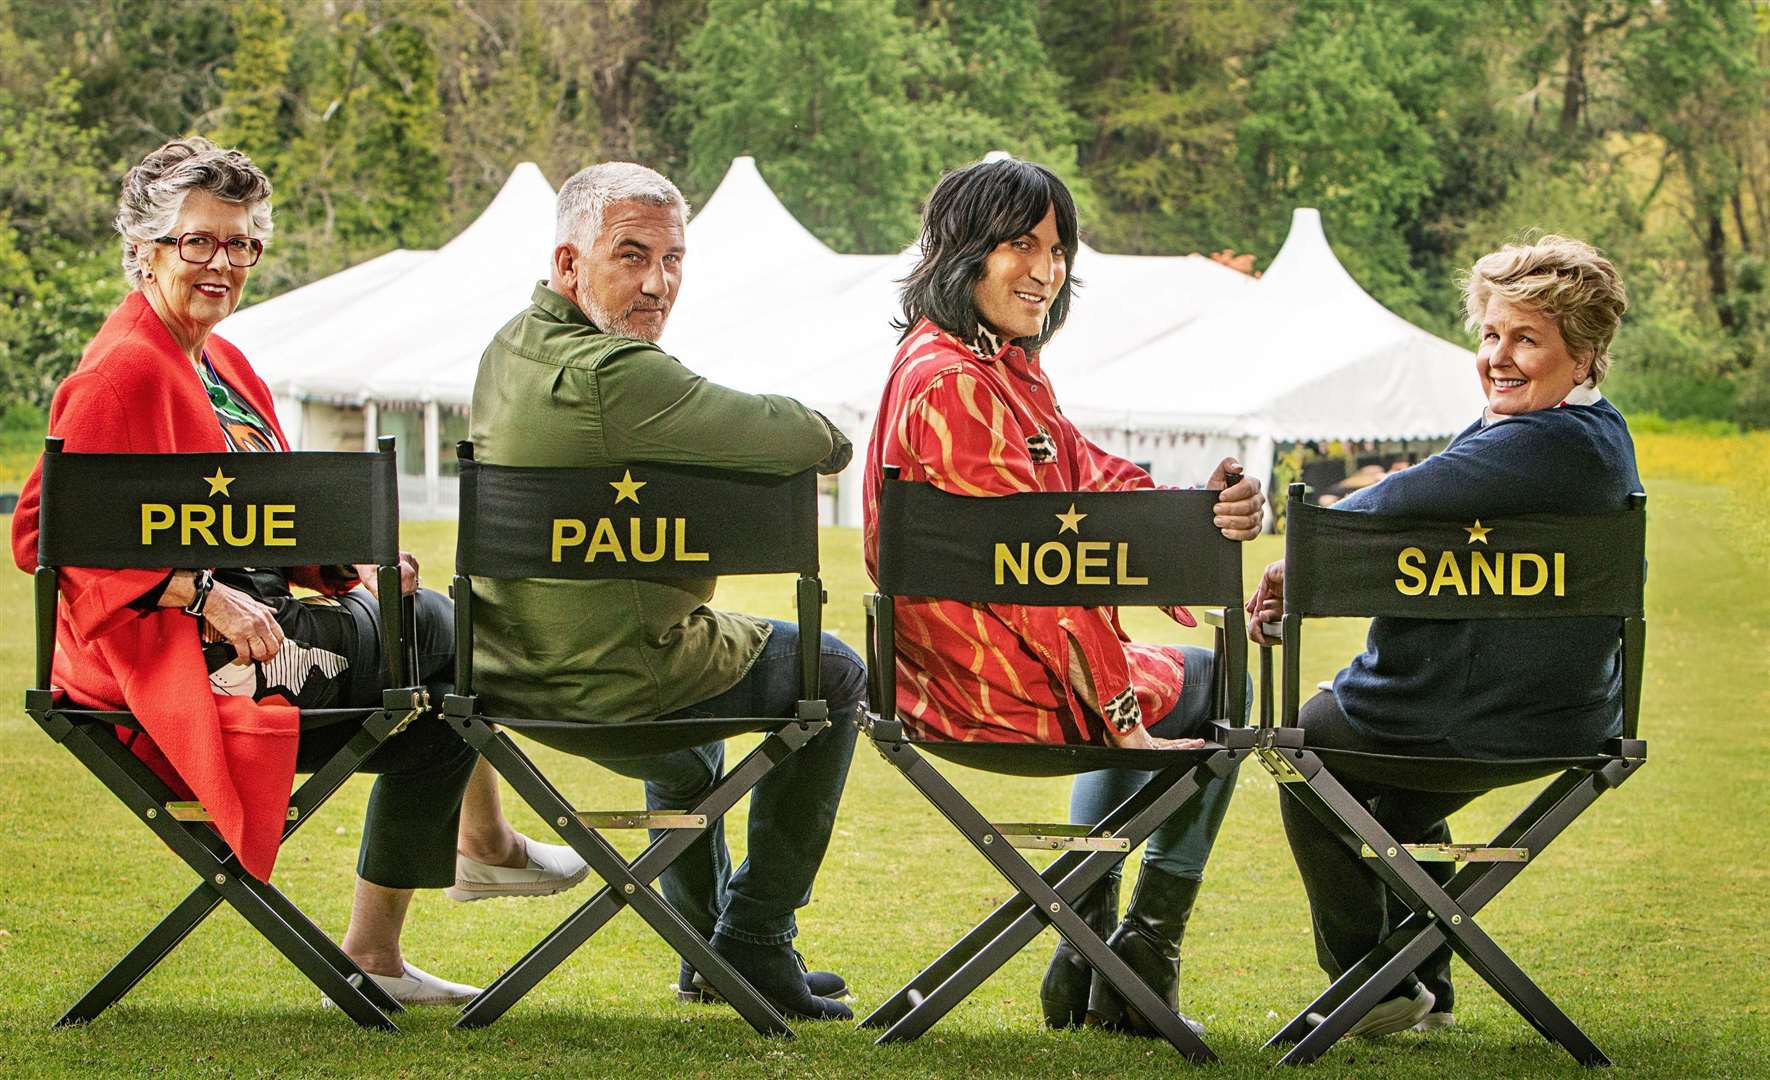 Sandi presented Bake Off with Prue Leith, Paul Hollywood and Noel Fielding Picture: Channel 4/Love Productions/Mark Bourdillon